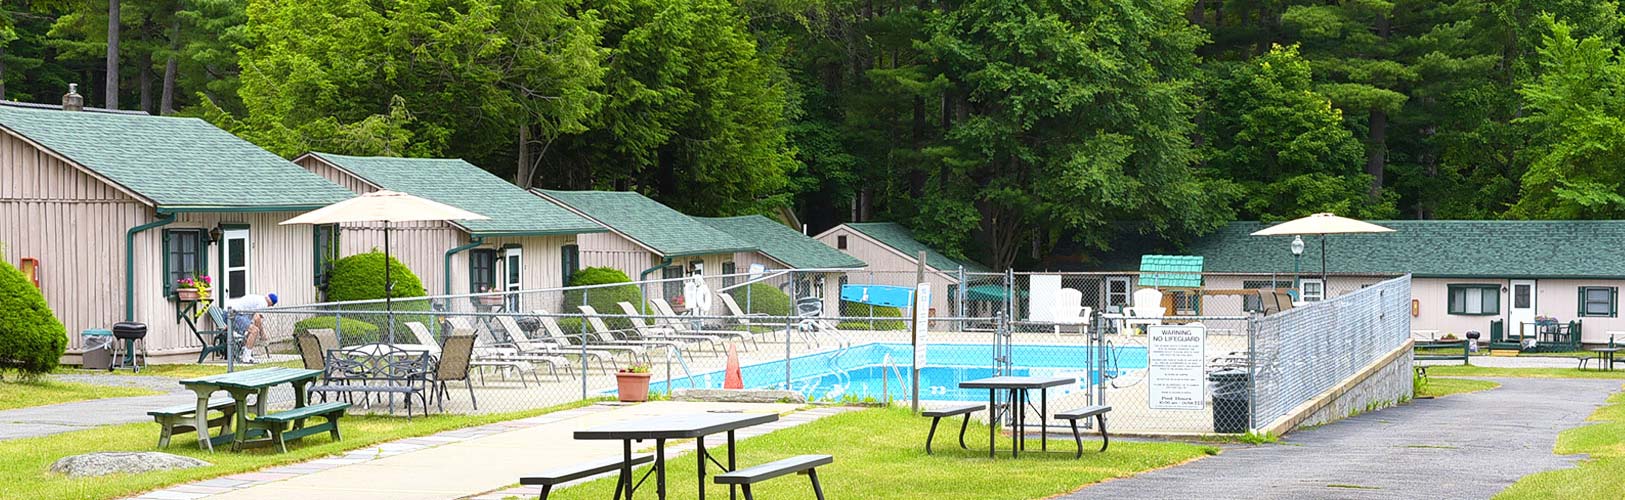 Cabins 1-15 and apartment suites situated around the main pool, playground and shuffleboard areas